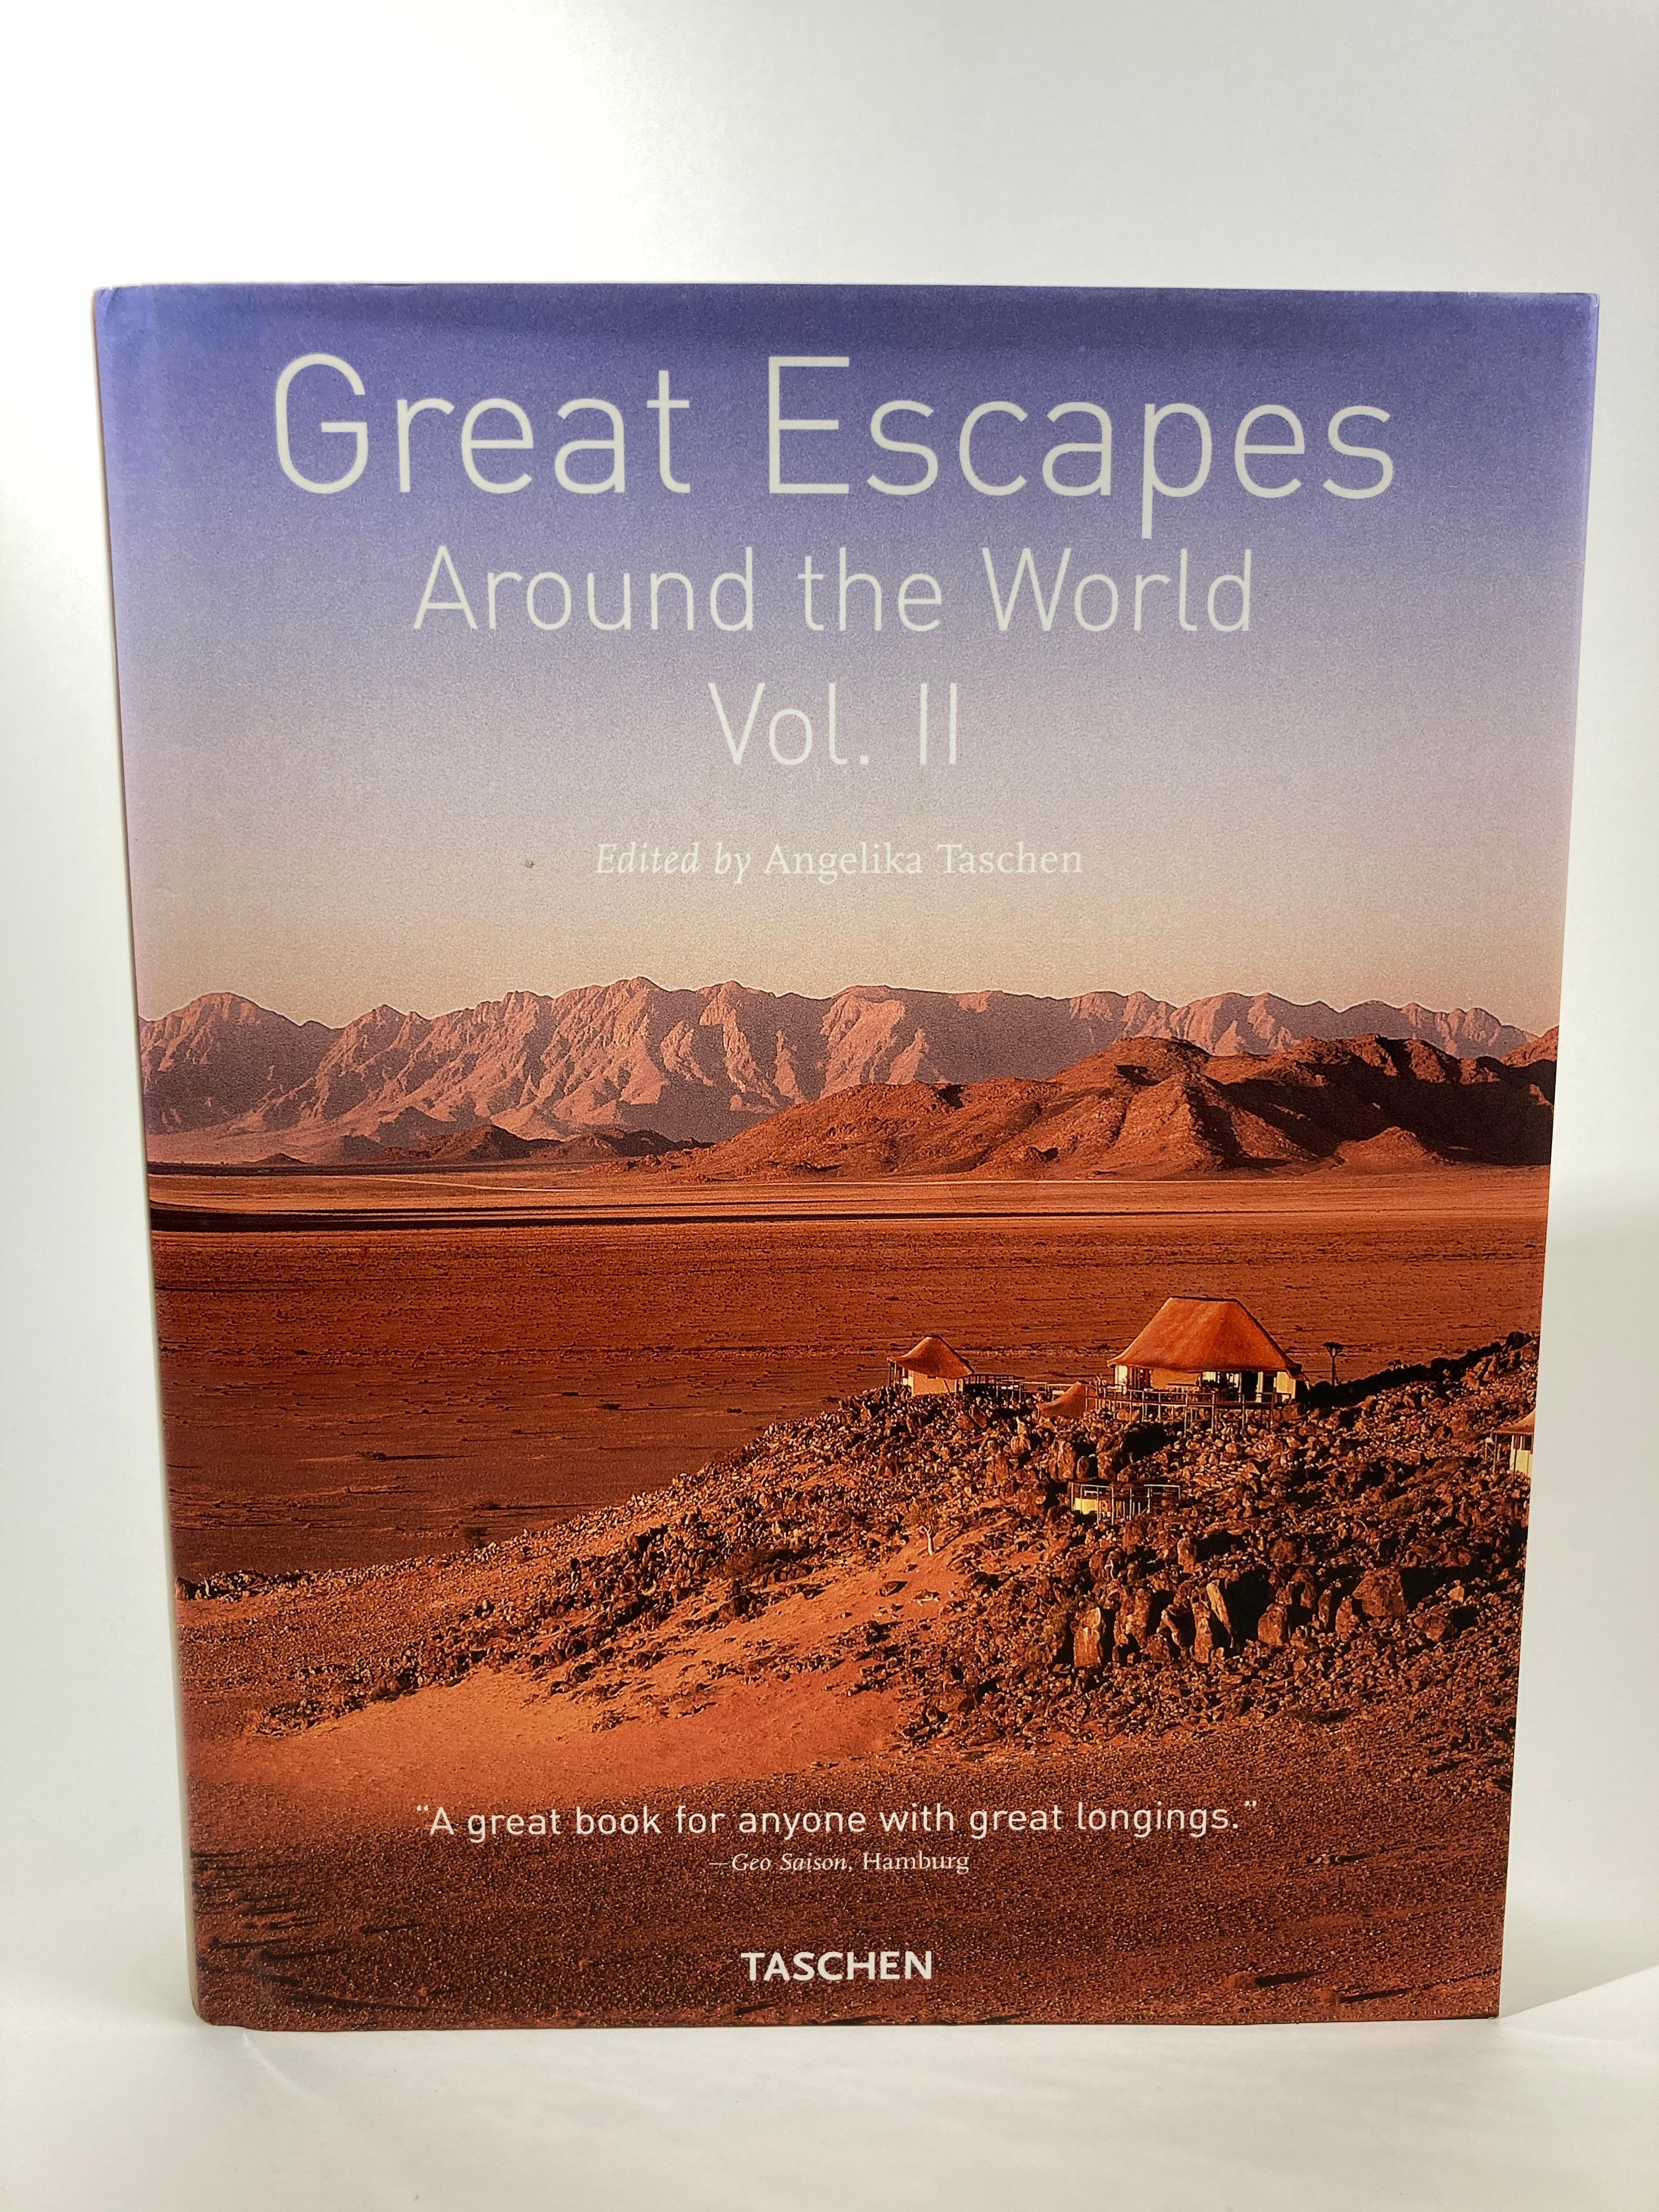 Great Escapes Around the World Vol. 2 by Taschen. Hardcover large heavy coffee table book. This title offers inspiring getaways from California to Zanzibar. The second installment of Angelika Taschen's round-up of the world's most exceptional hotels